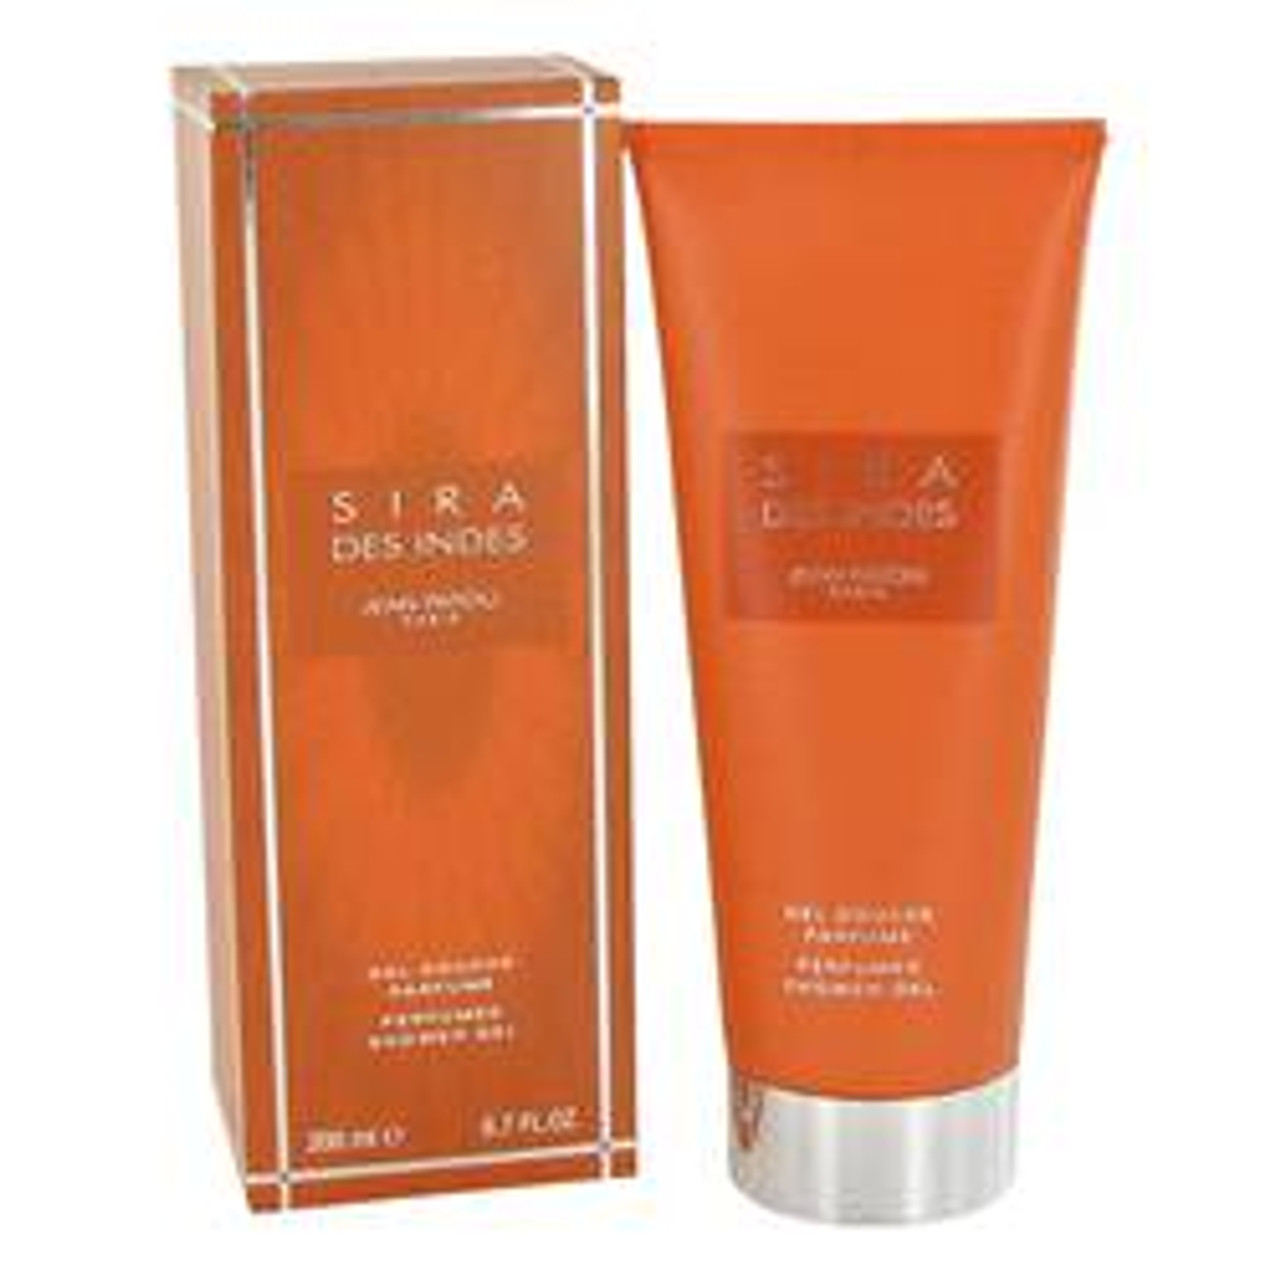 Sira Des Indes Perfume By Jean Patou Shower Gel 6.7 oz for Women - [From 39.00 - Choose pk Qty ] - *Ships from Miami